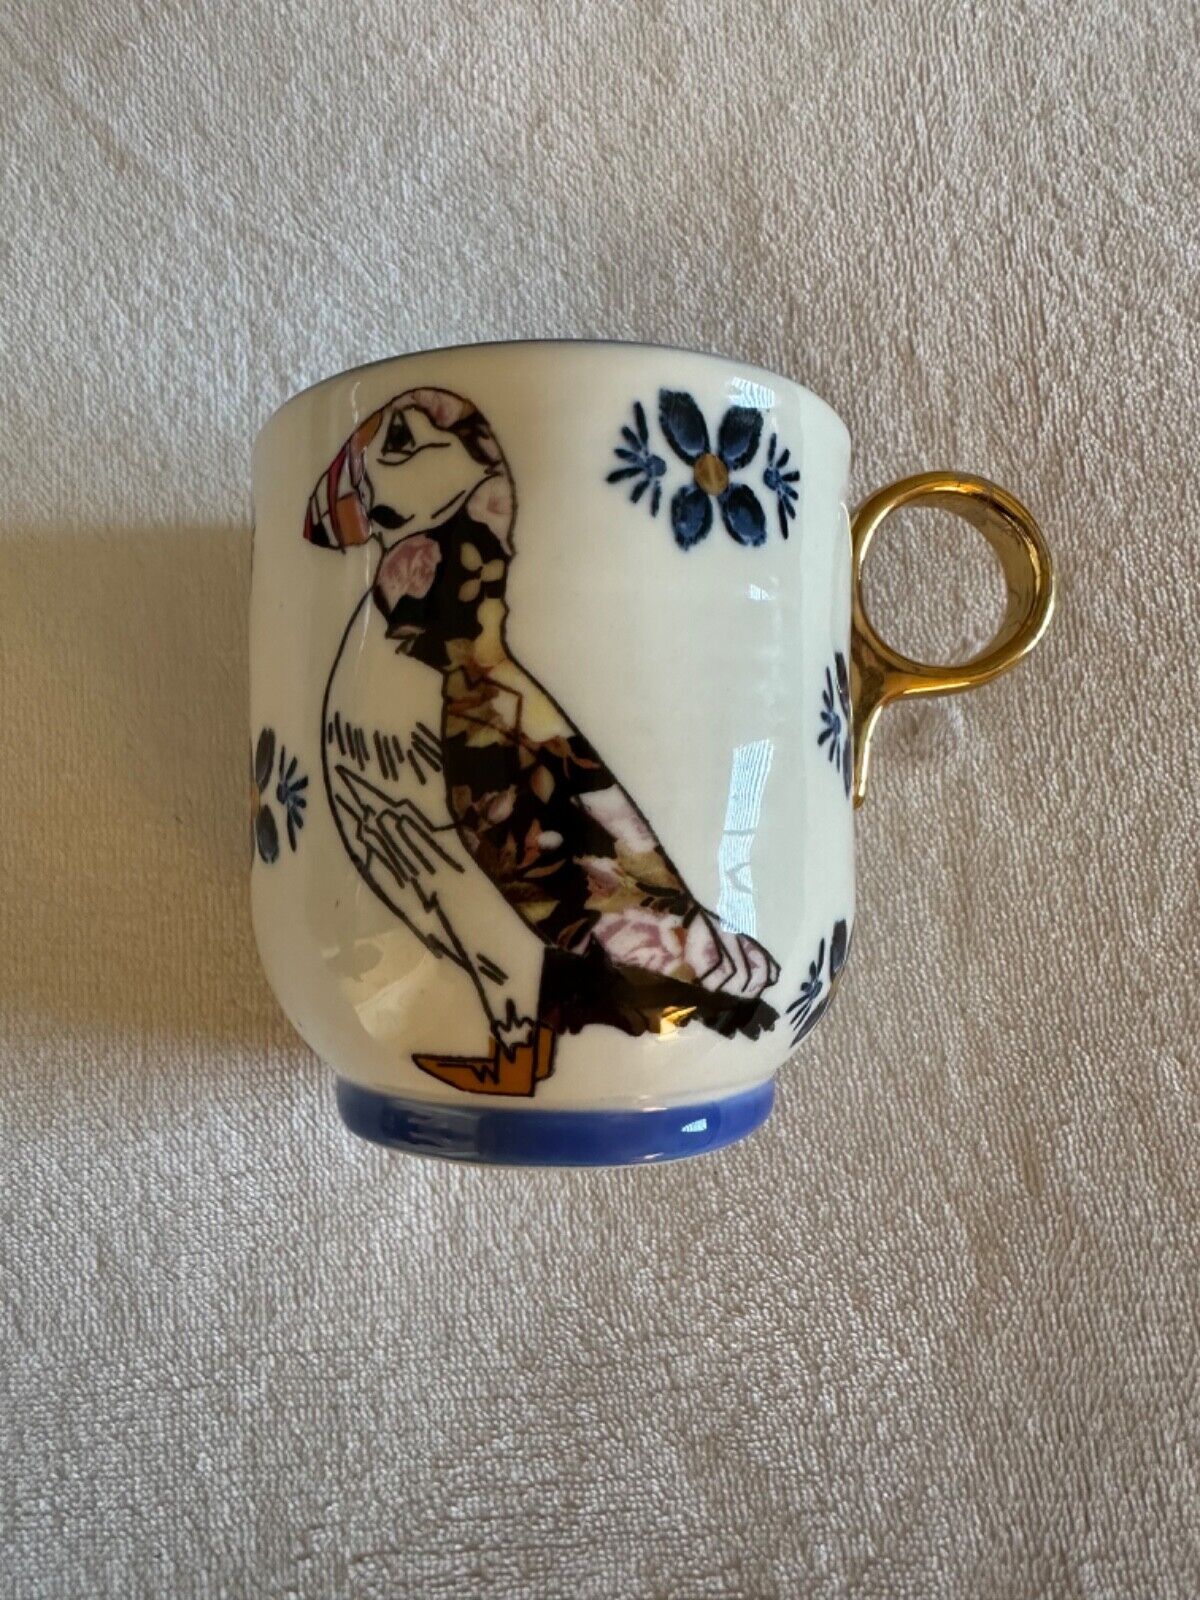 Anthropologie Plumology Series Puffin Mug By Lee Page Hanson with Gold Handle